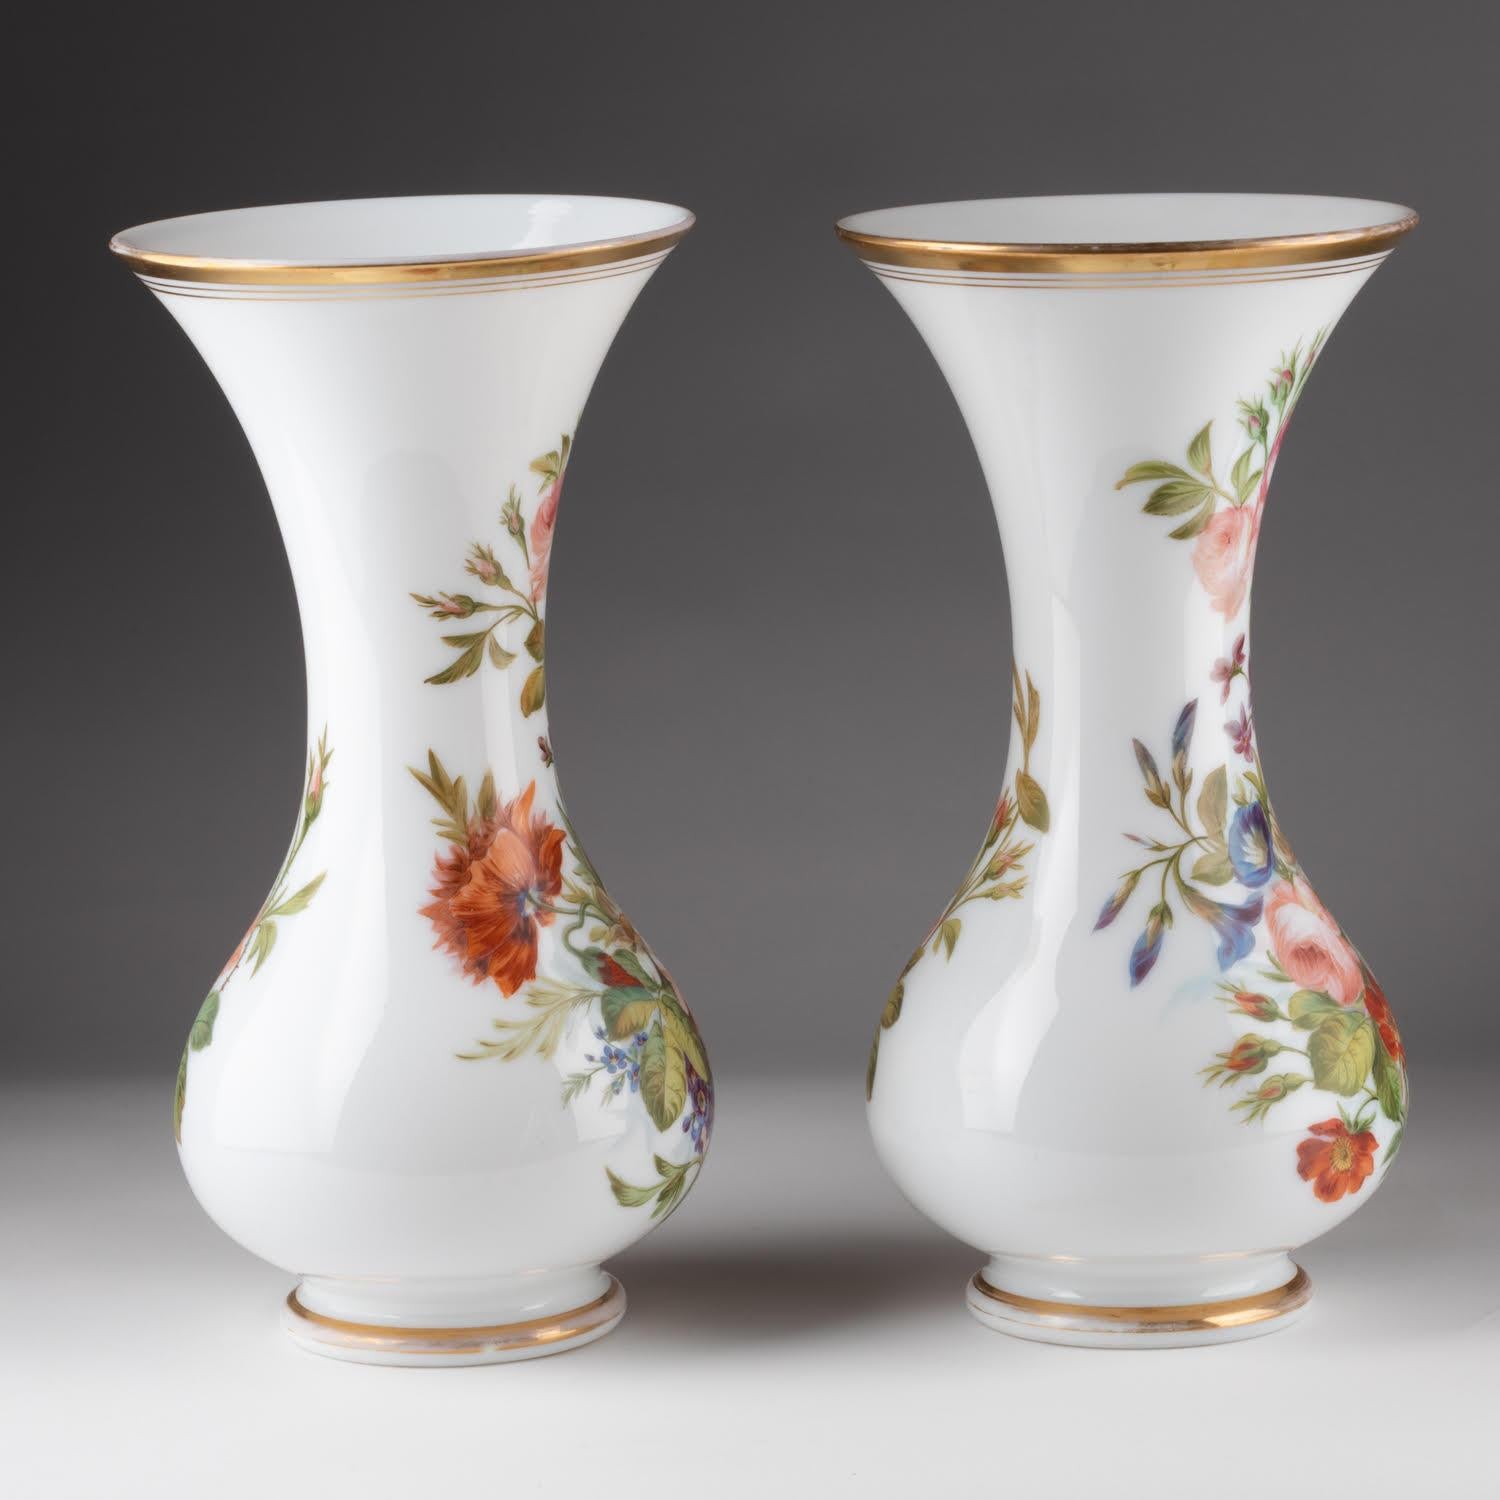 Pair of Opaline Vases Painted with Floral Motifs, 19th Century. For Sale 1